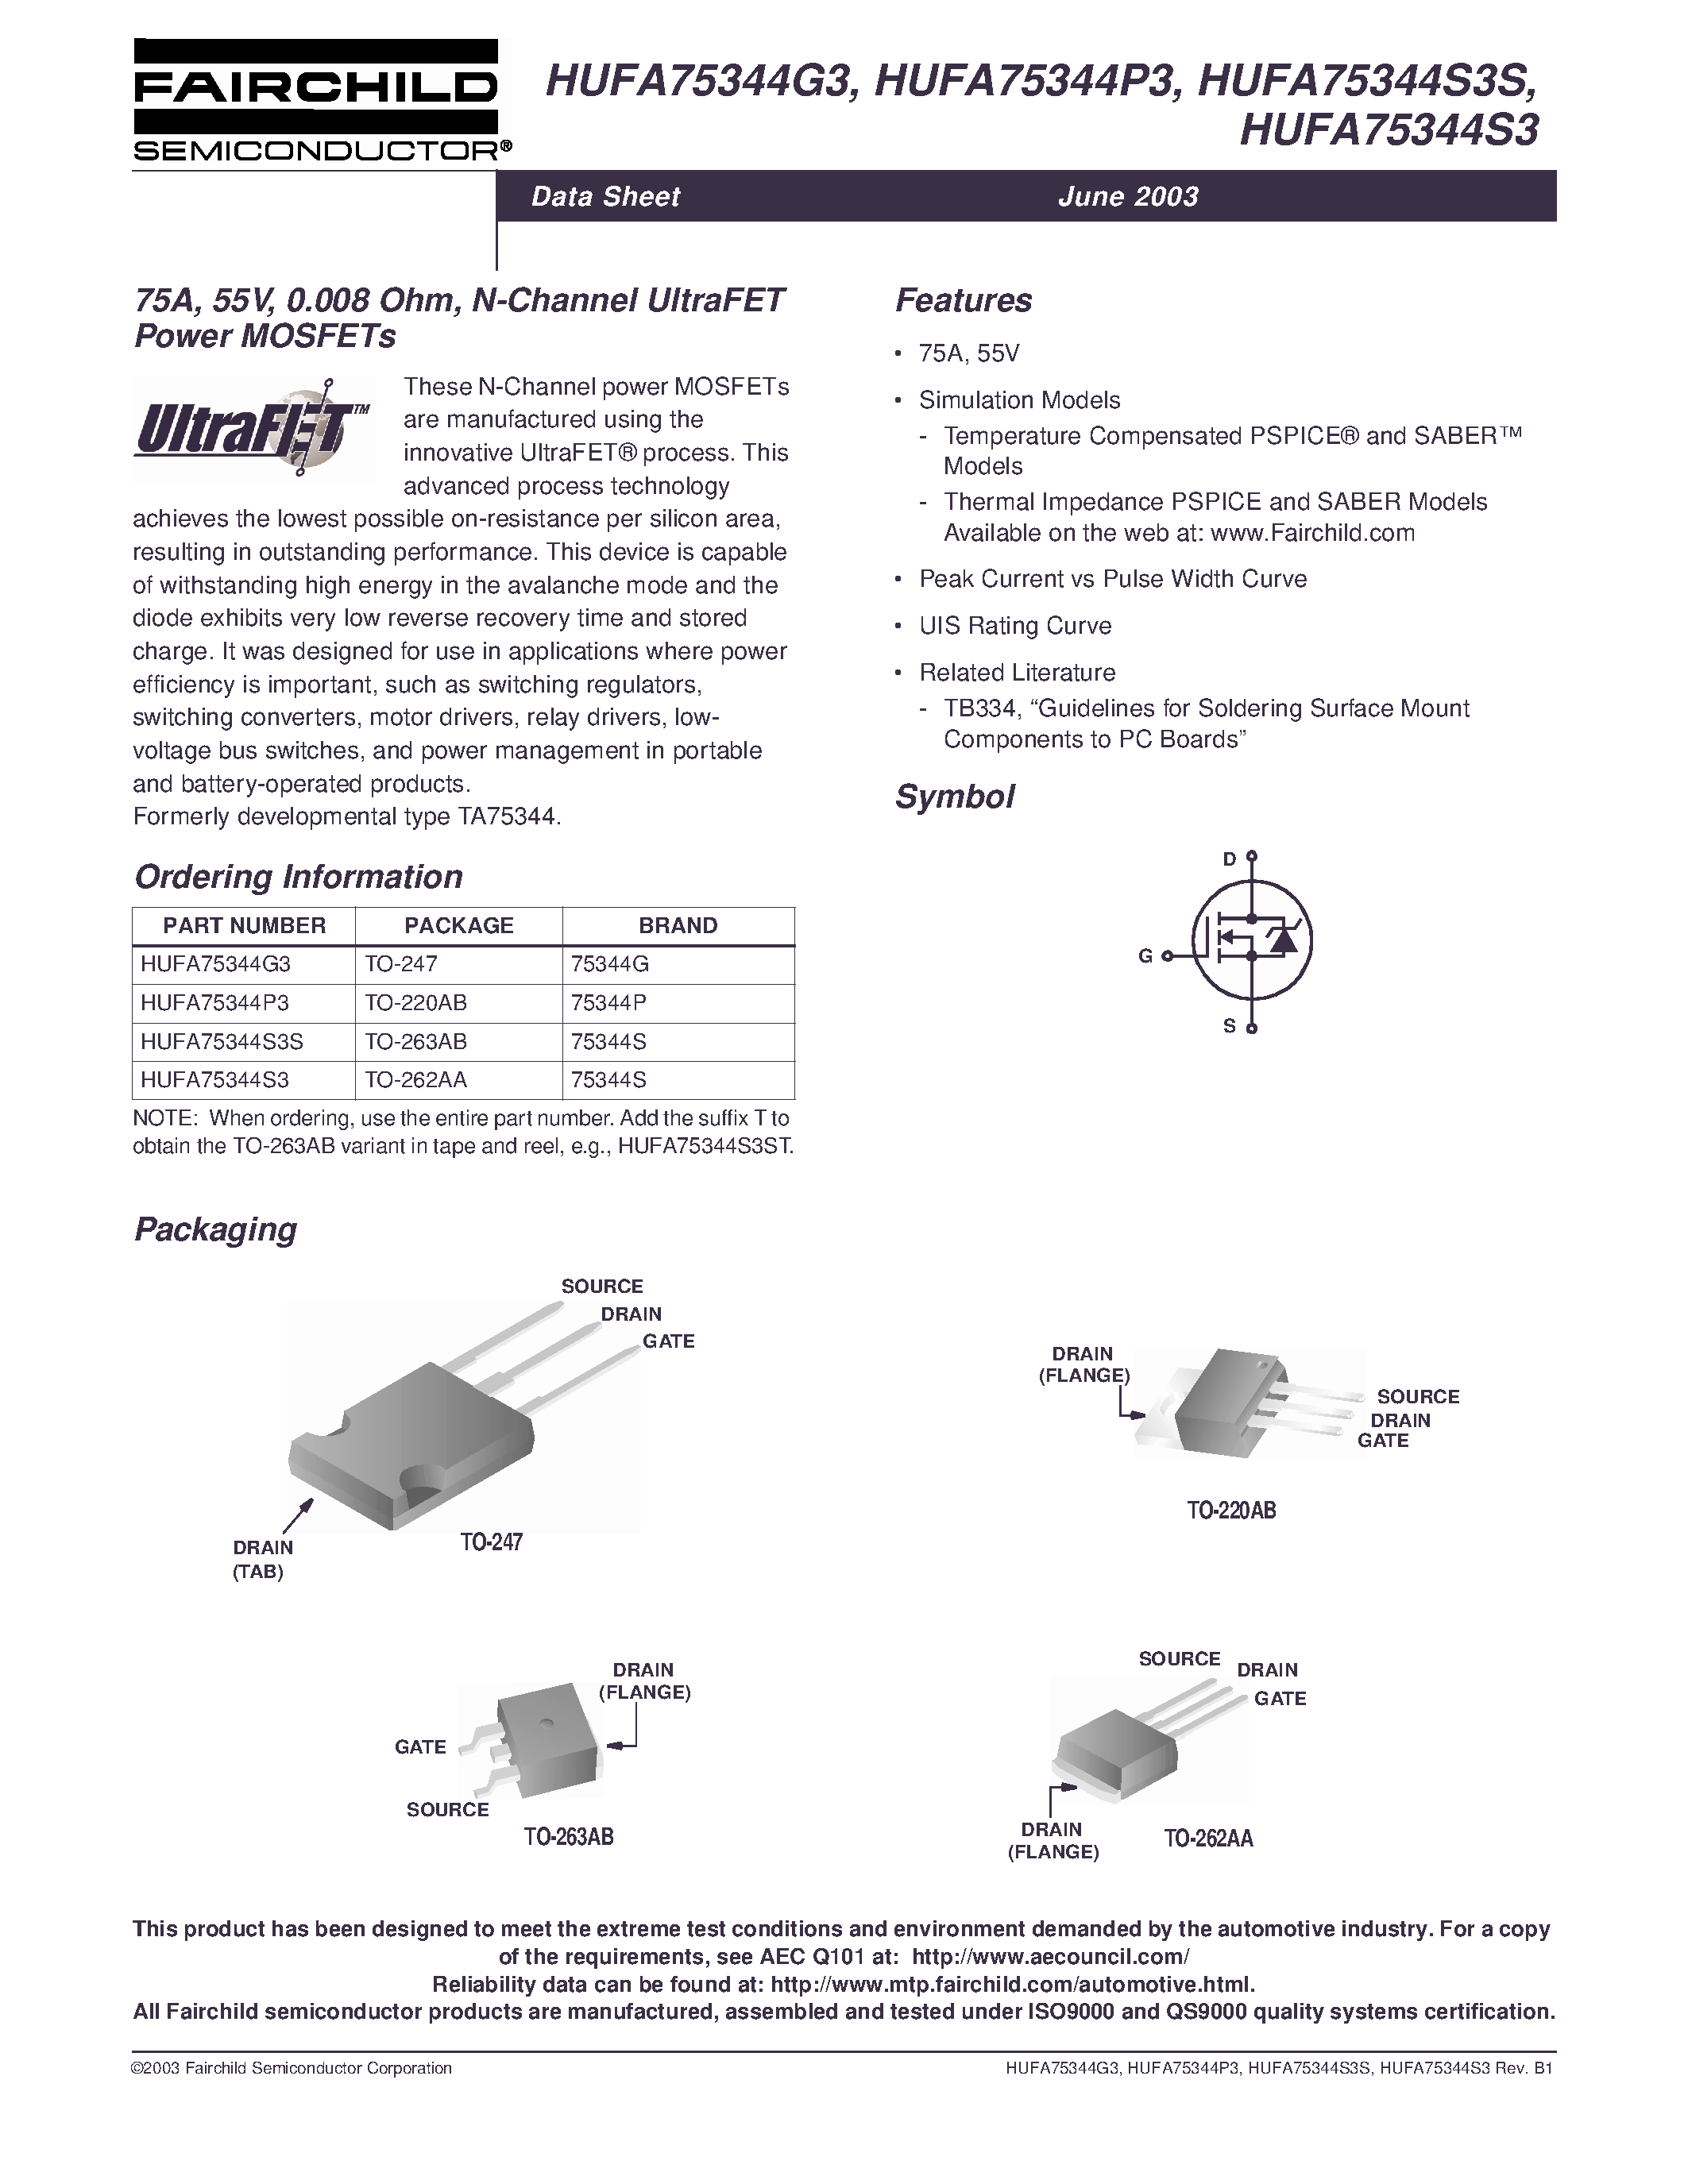 Datasheet HUFA75344P3 - 75A/ 55V/ 0.008 Ohm/ N-Channel UltraFET Power MOSFETs page 1